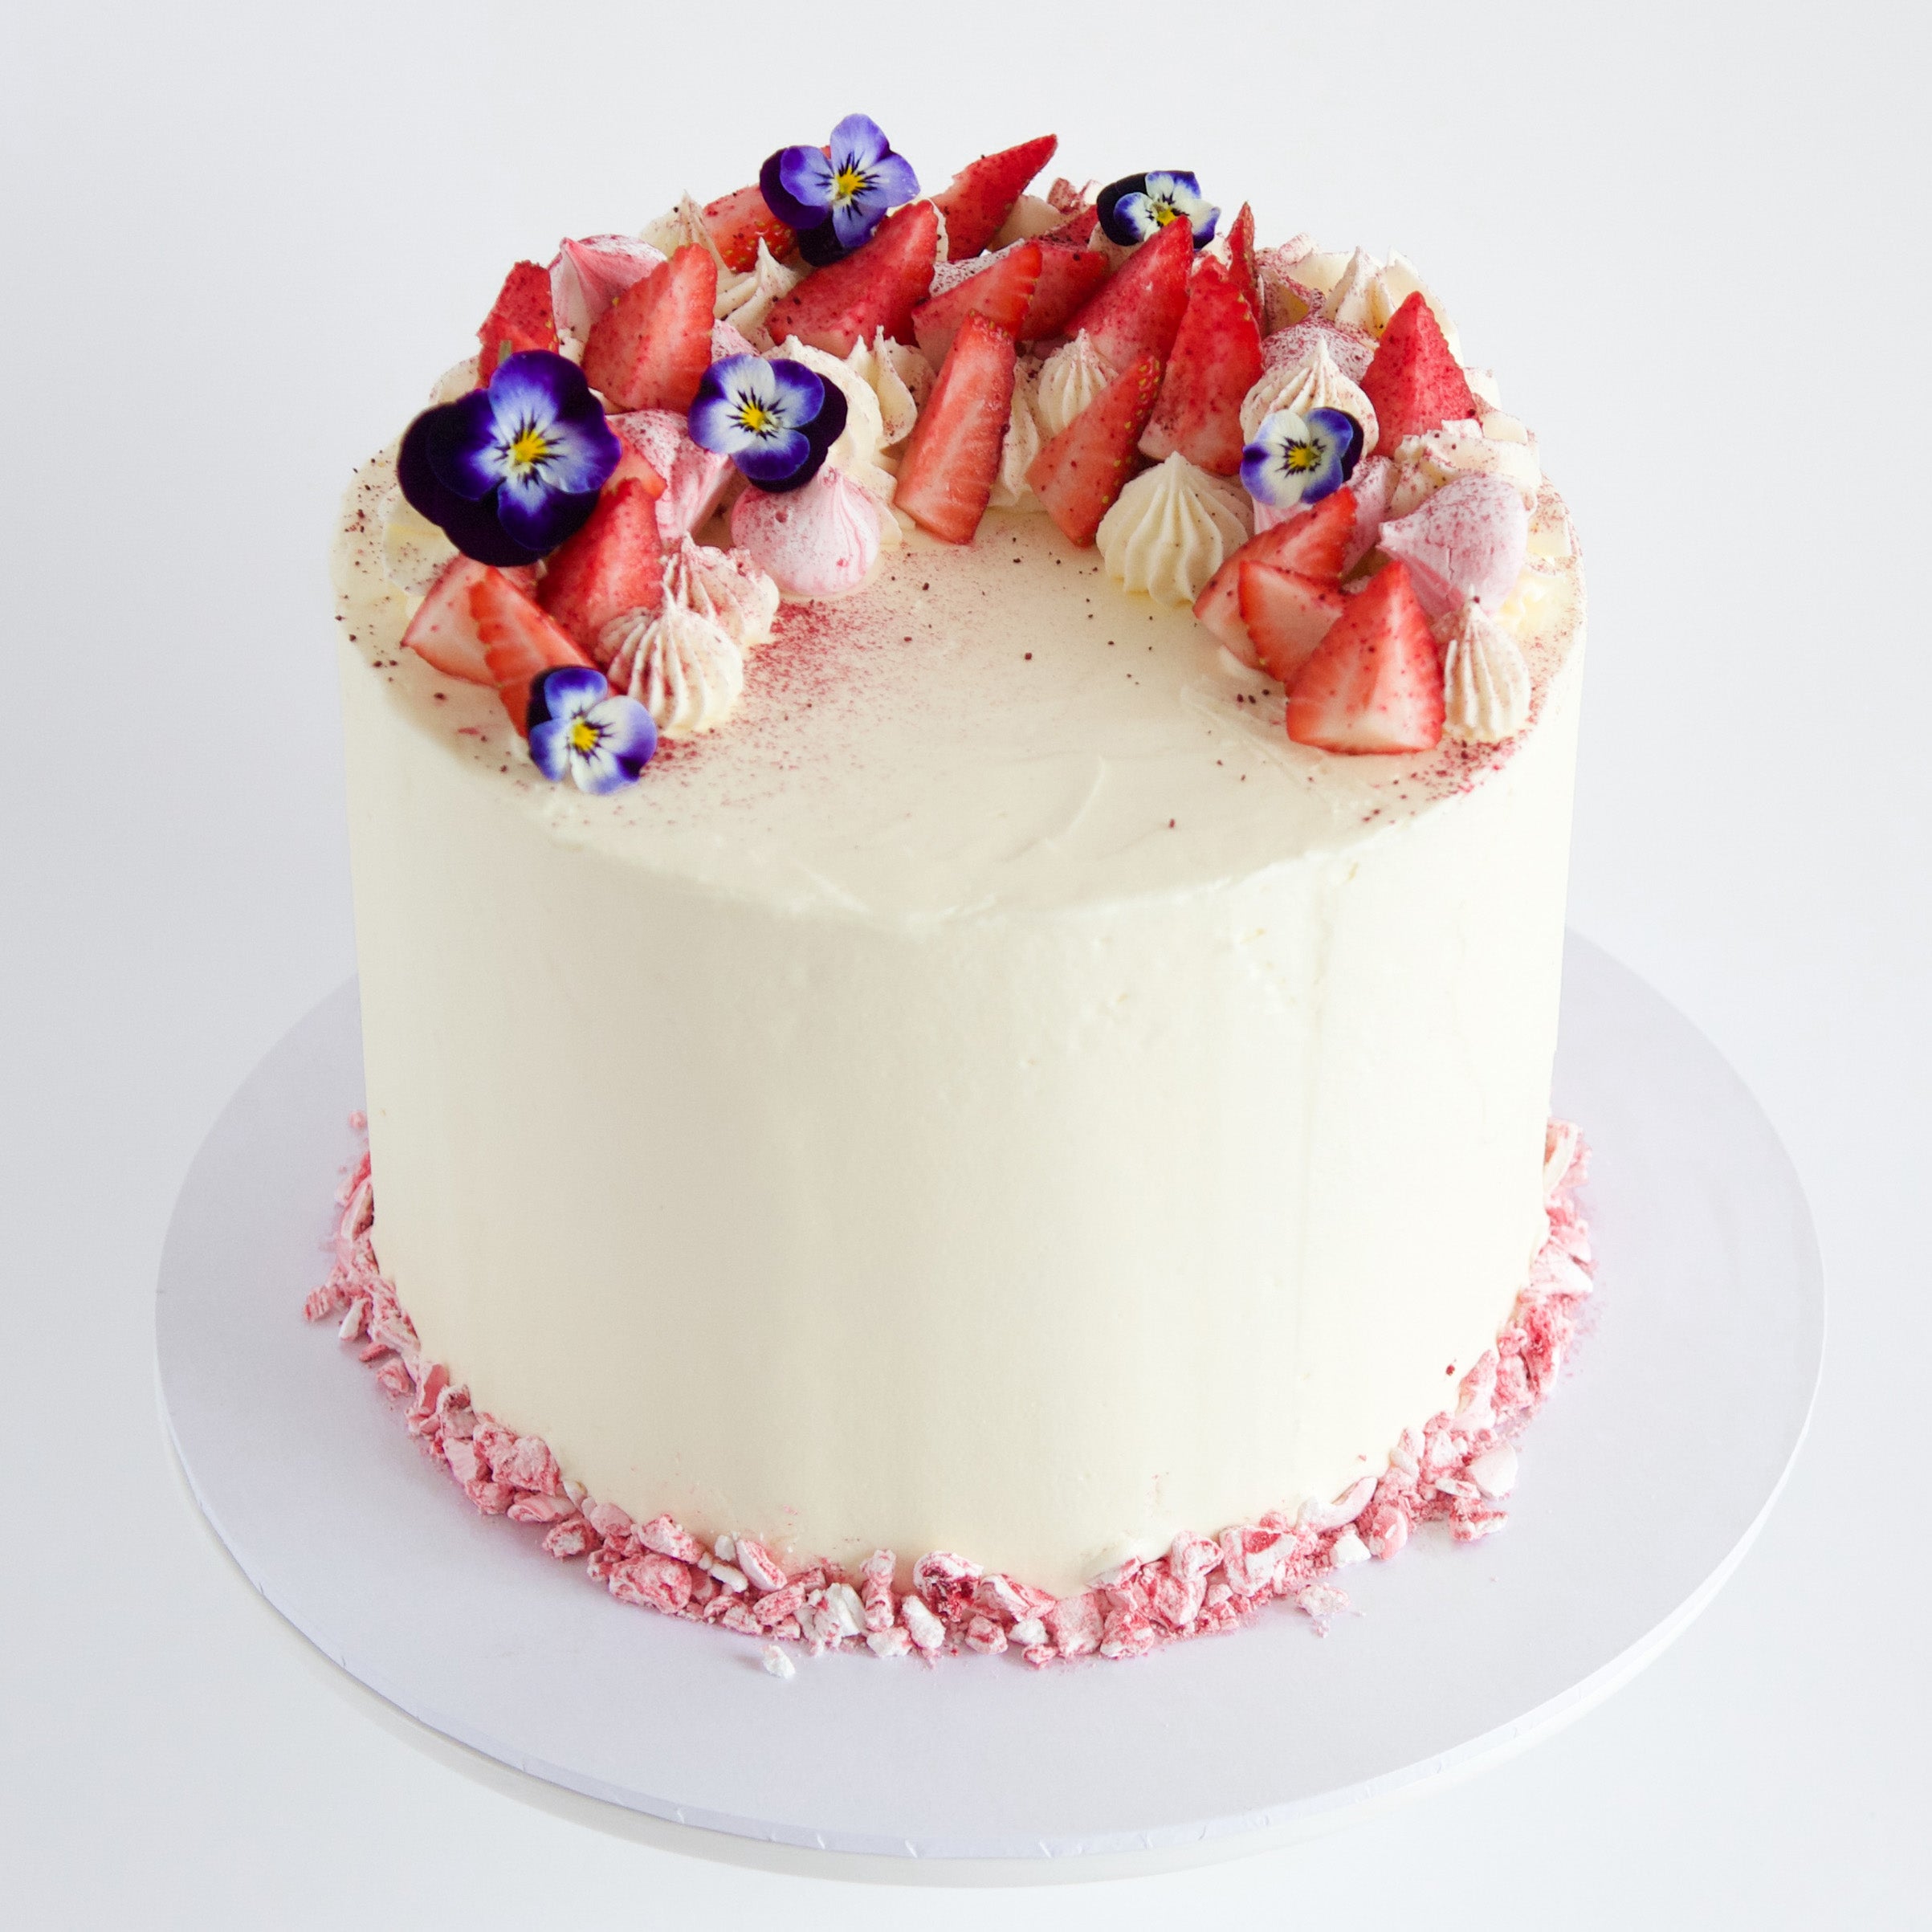 Buy Cakes Online, 100% Fresh w/ Fast Delivery in London